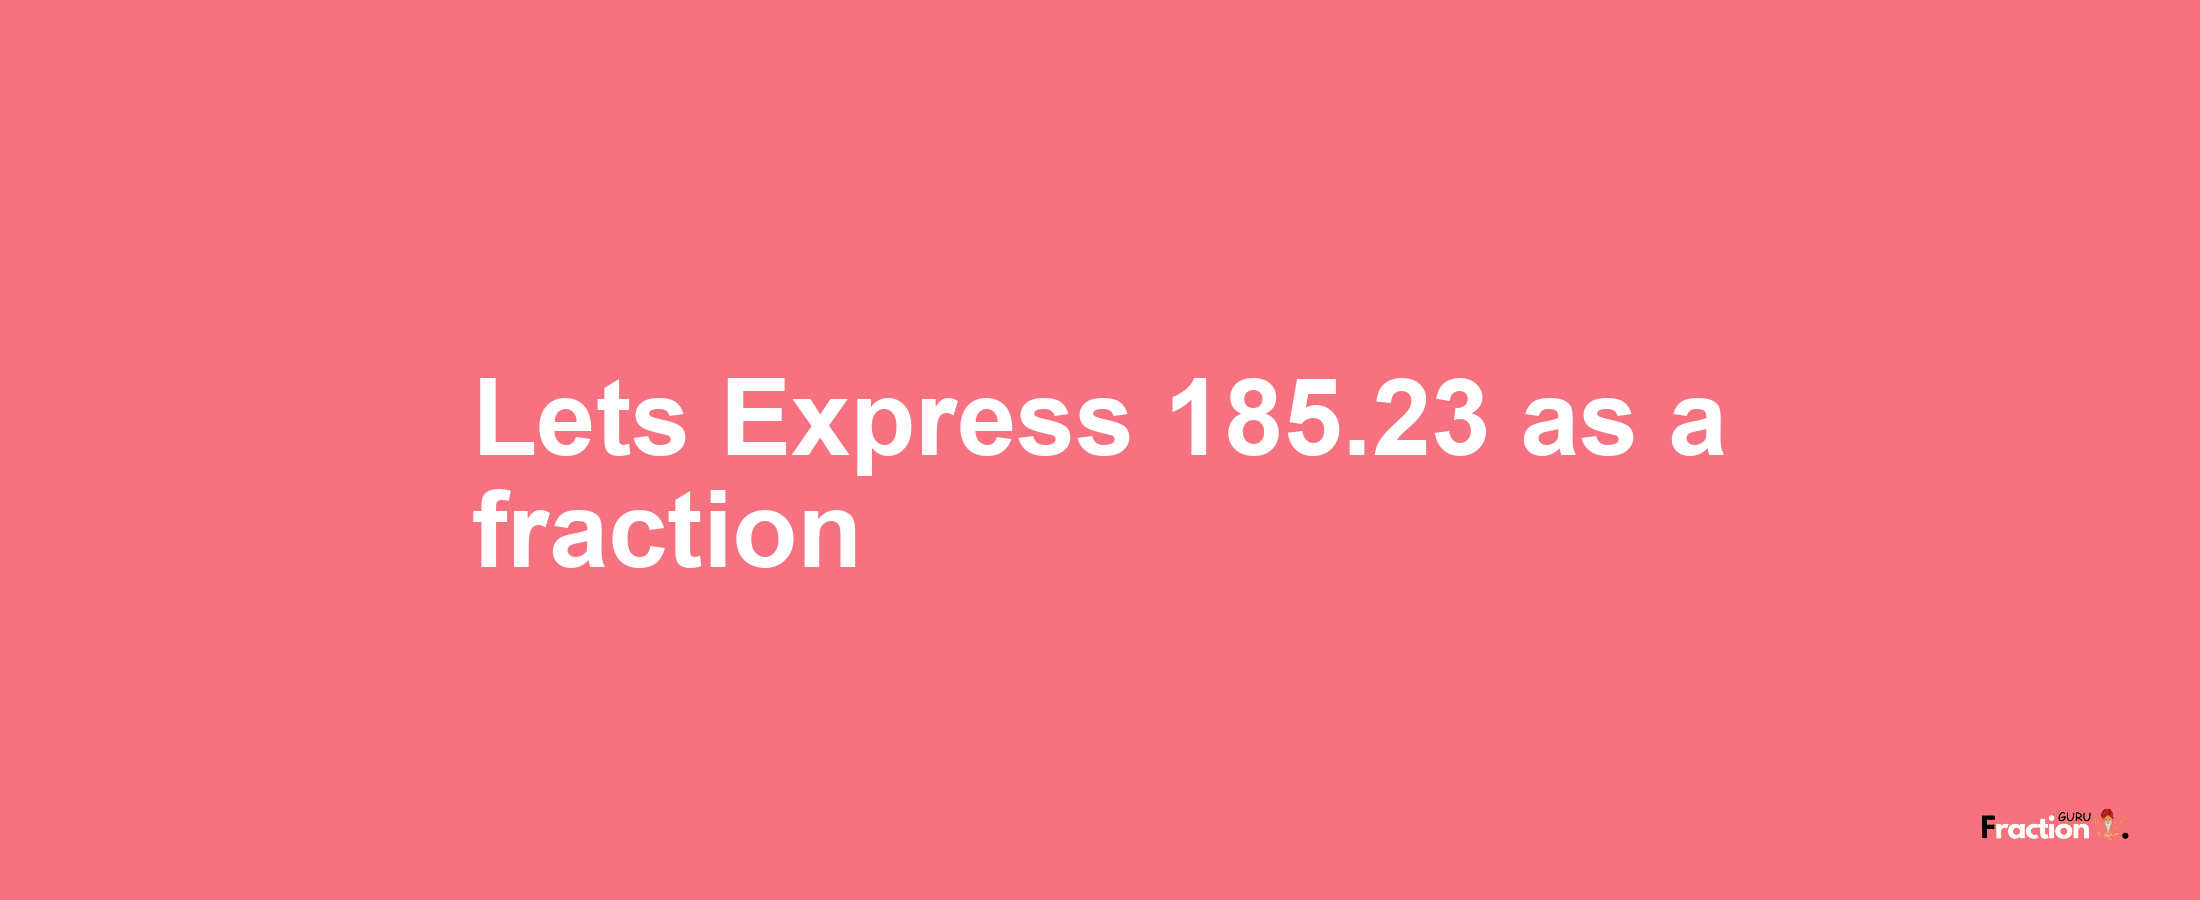 Lets Express 185.23 as afraction